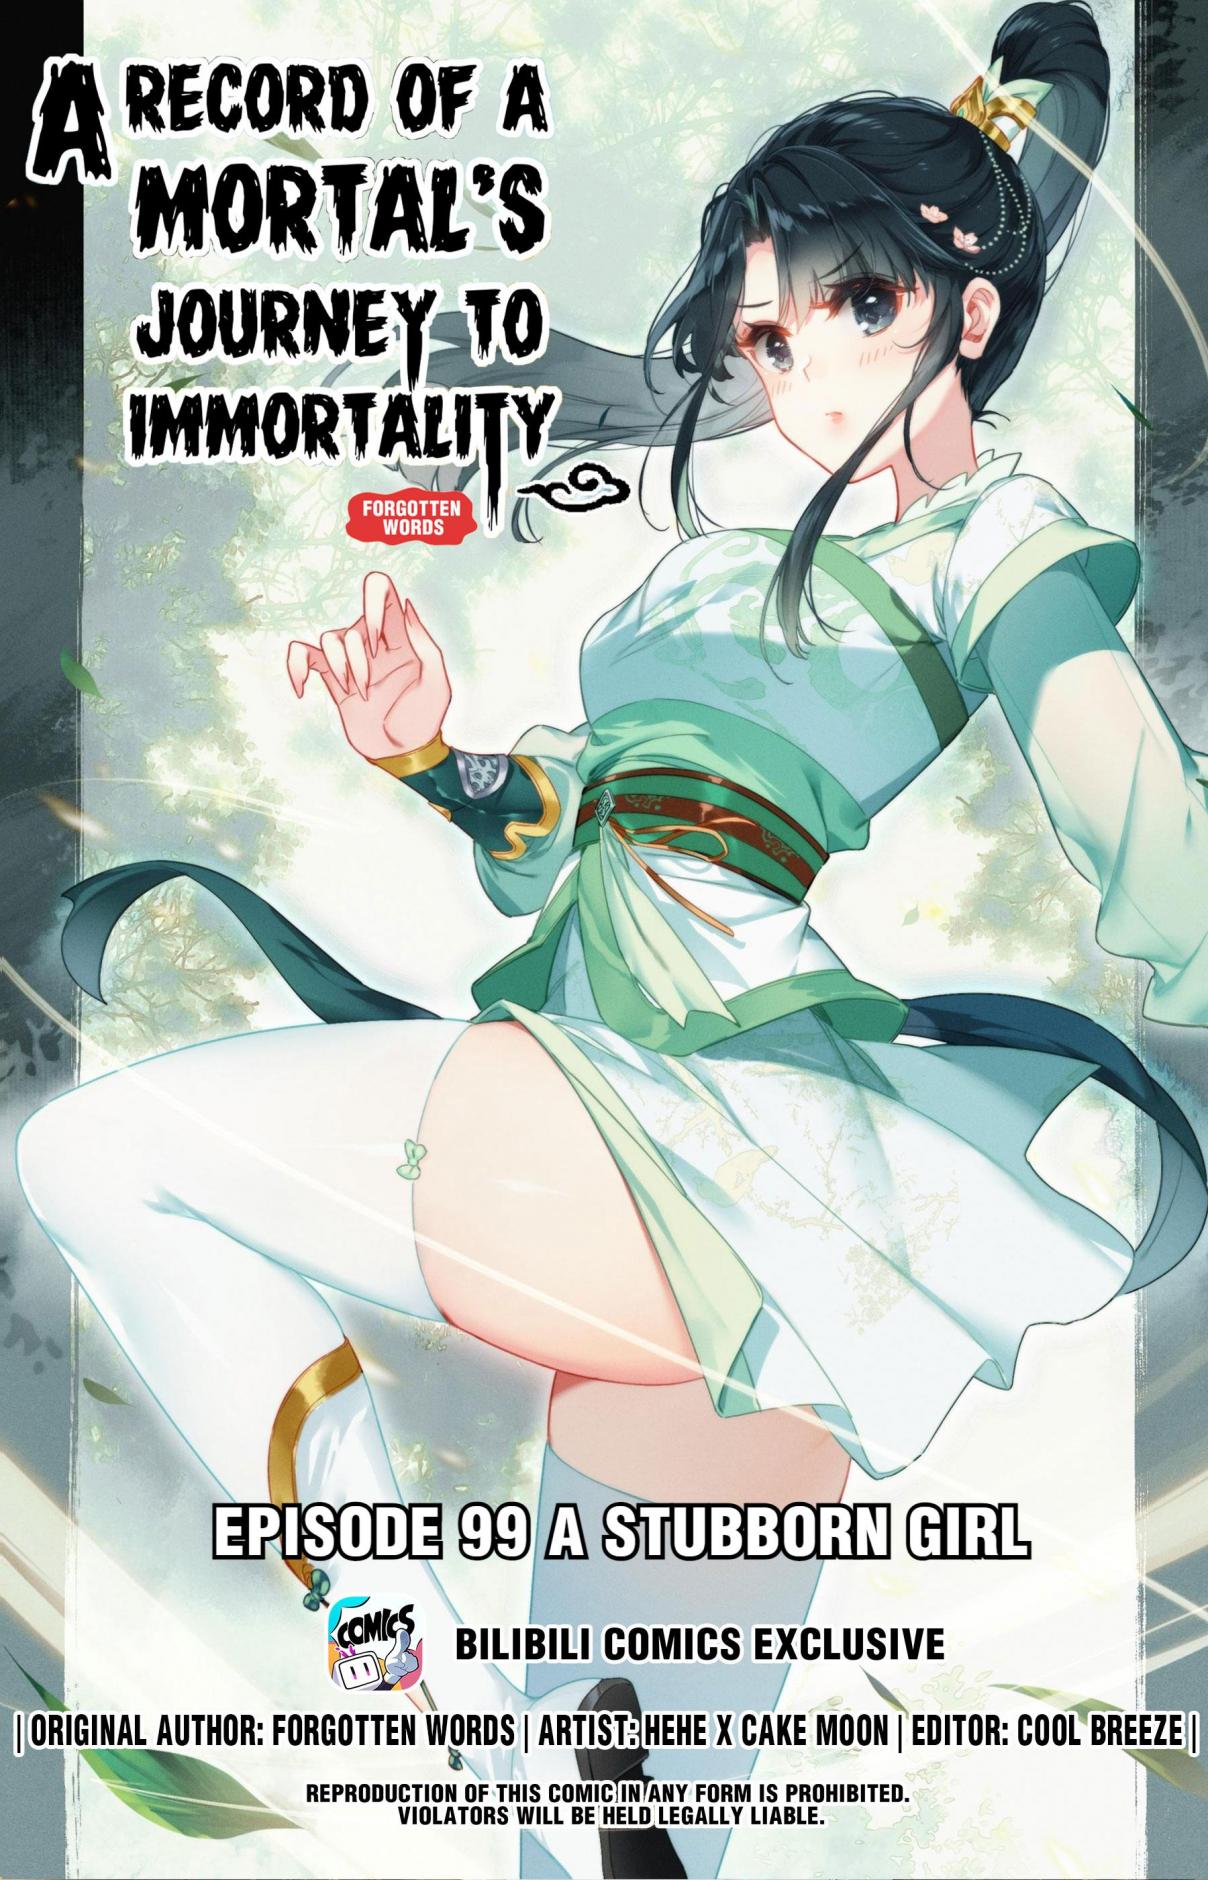 A Record of a Mortal's Journey to Immortality 99 A Stubborn Girl